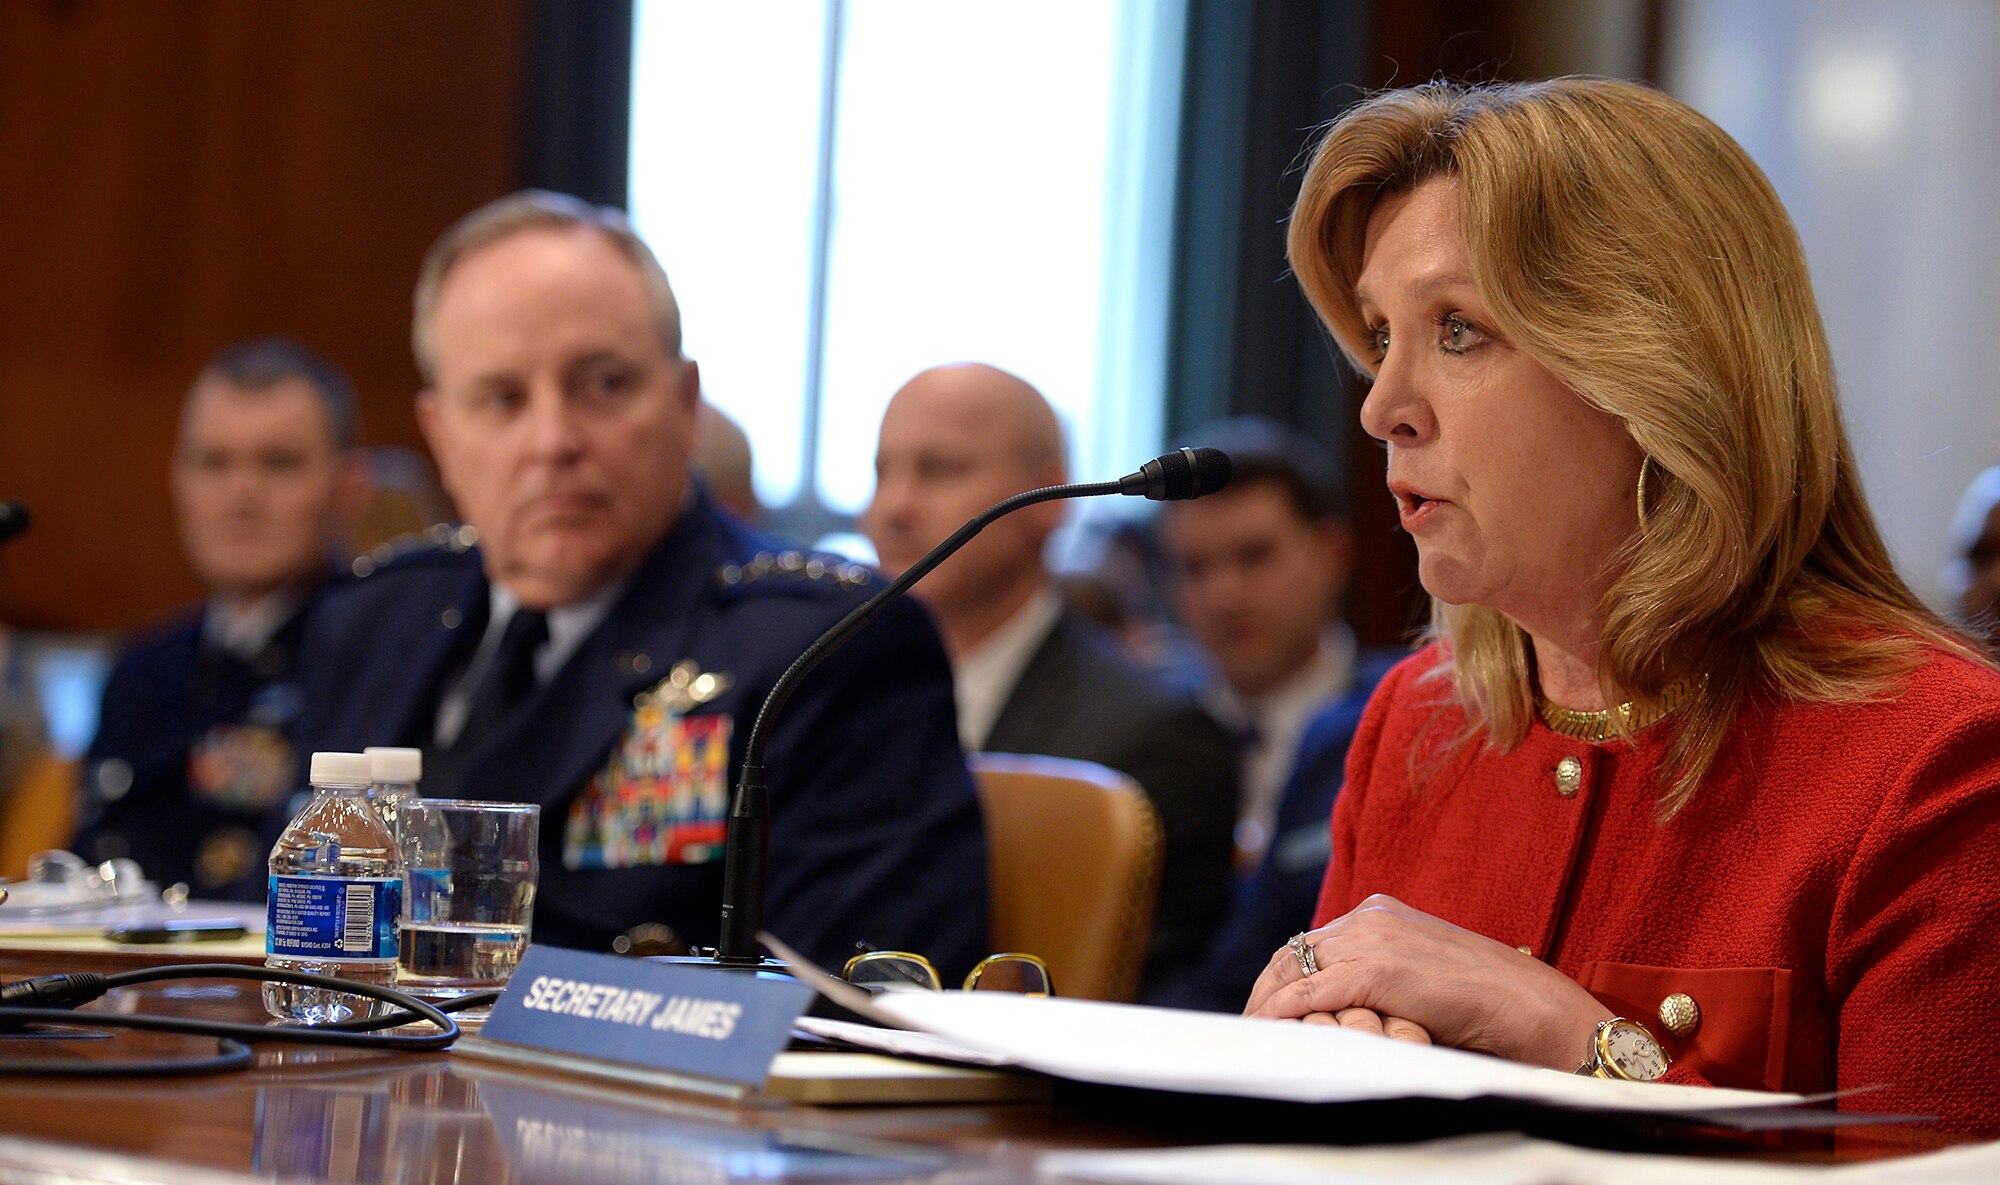 Air Force Secretary Deborah Lee James and Air Force Chief of Staff Gen. Mark A. Welsh III testify before the Senate Appropriations Committee on Defense in Washington, D.C., Feb. 10, 2016. The two leaders presented the fiscal year 2017 Air Force budget request. (U.S. Air Force photo/Scott M. Ash)